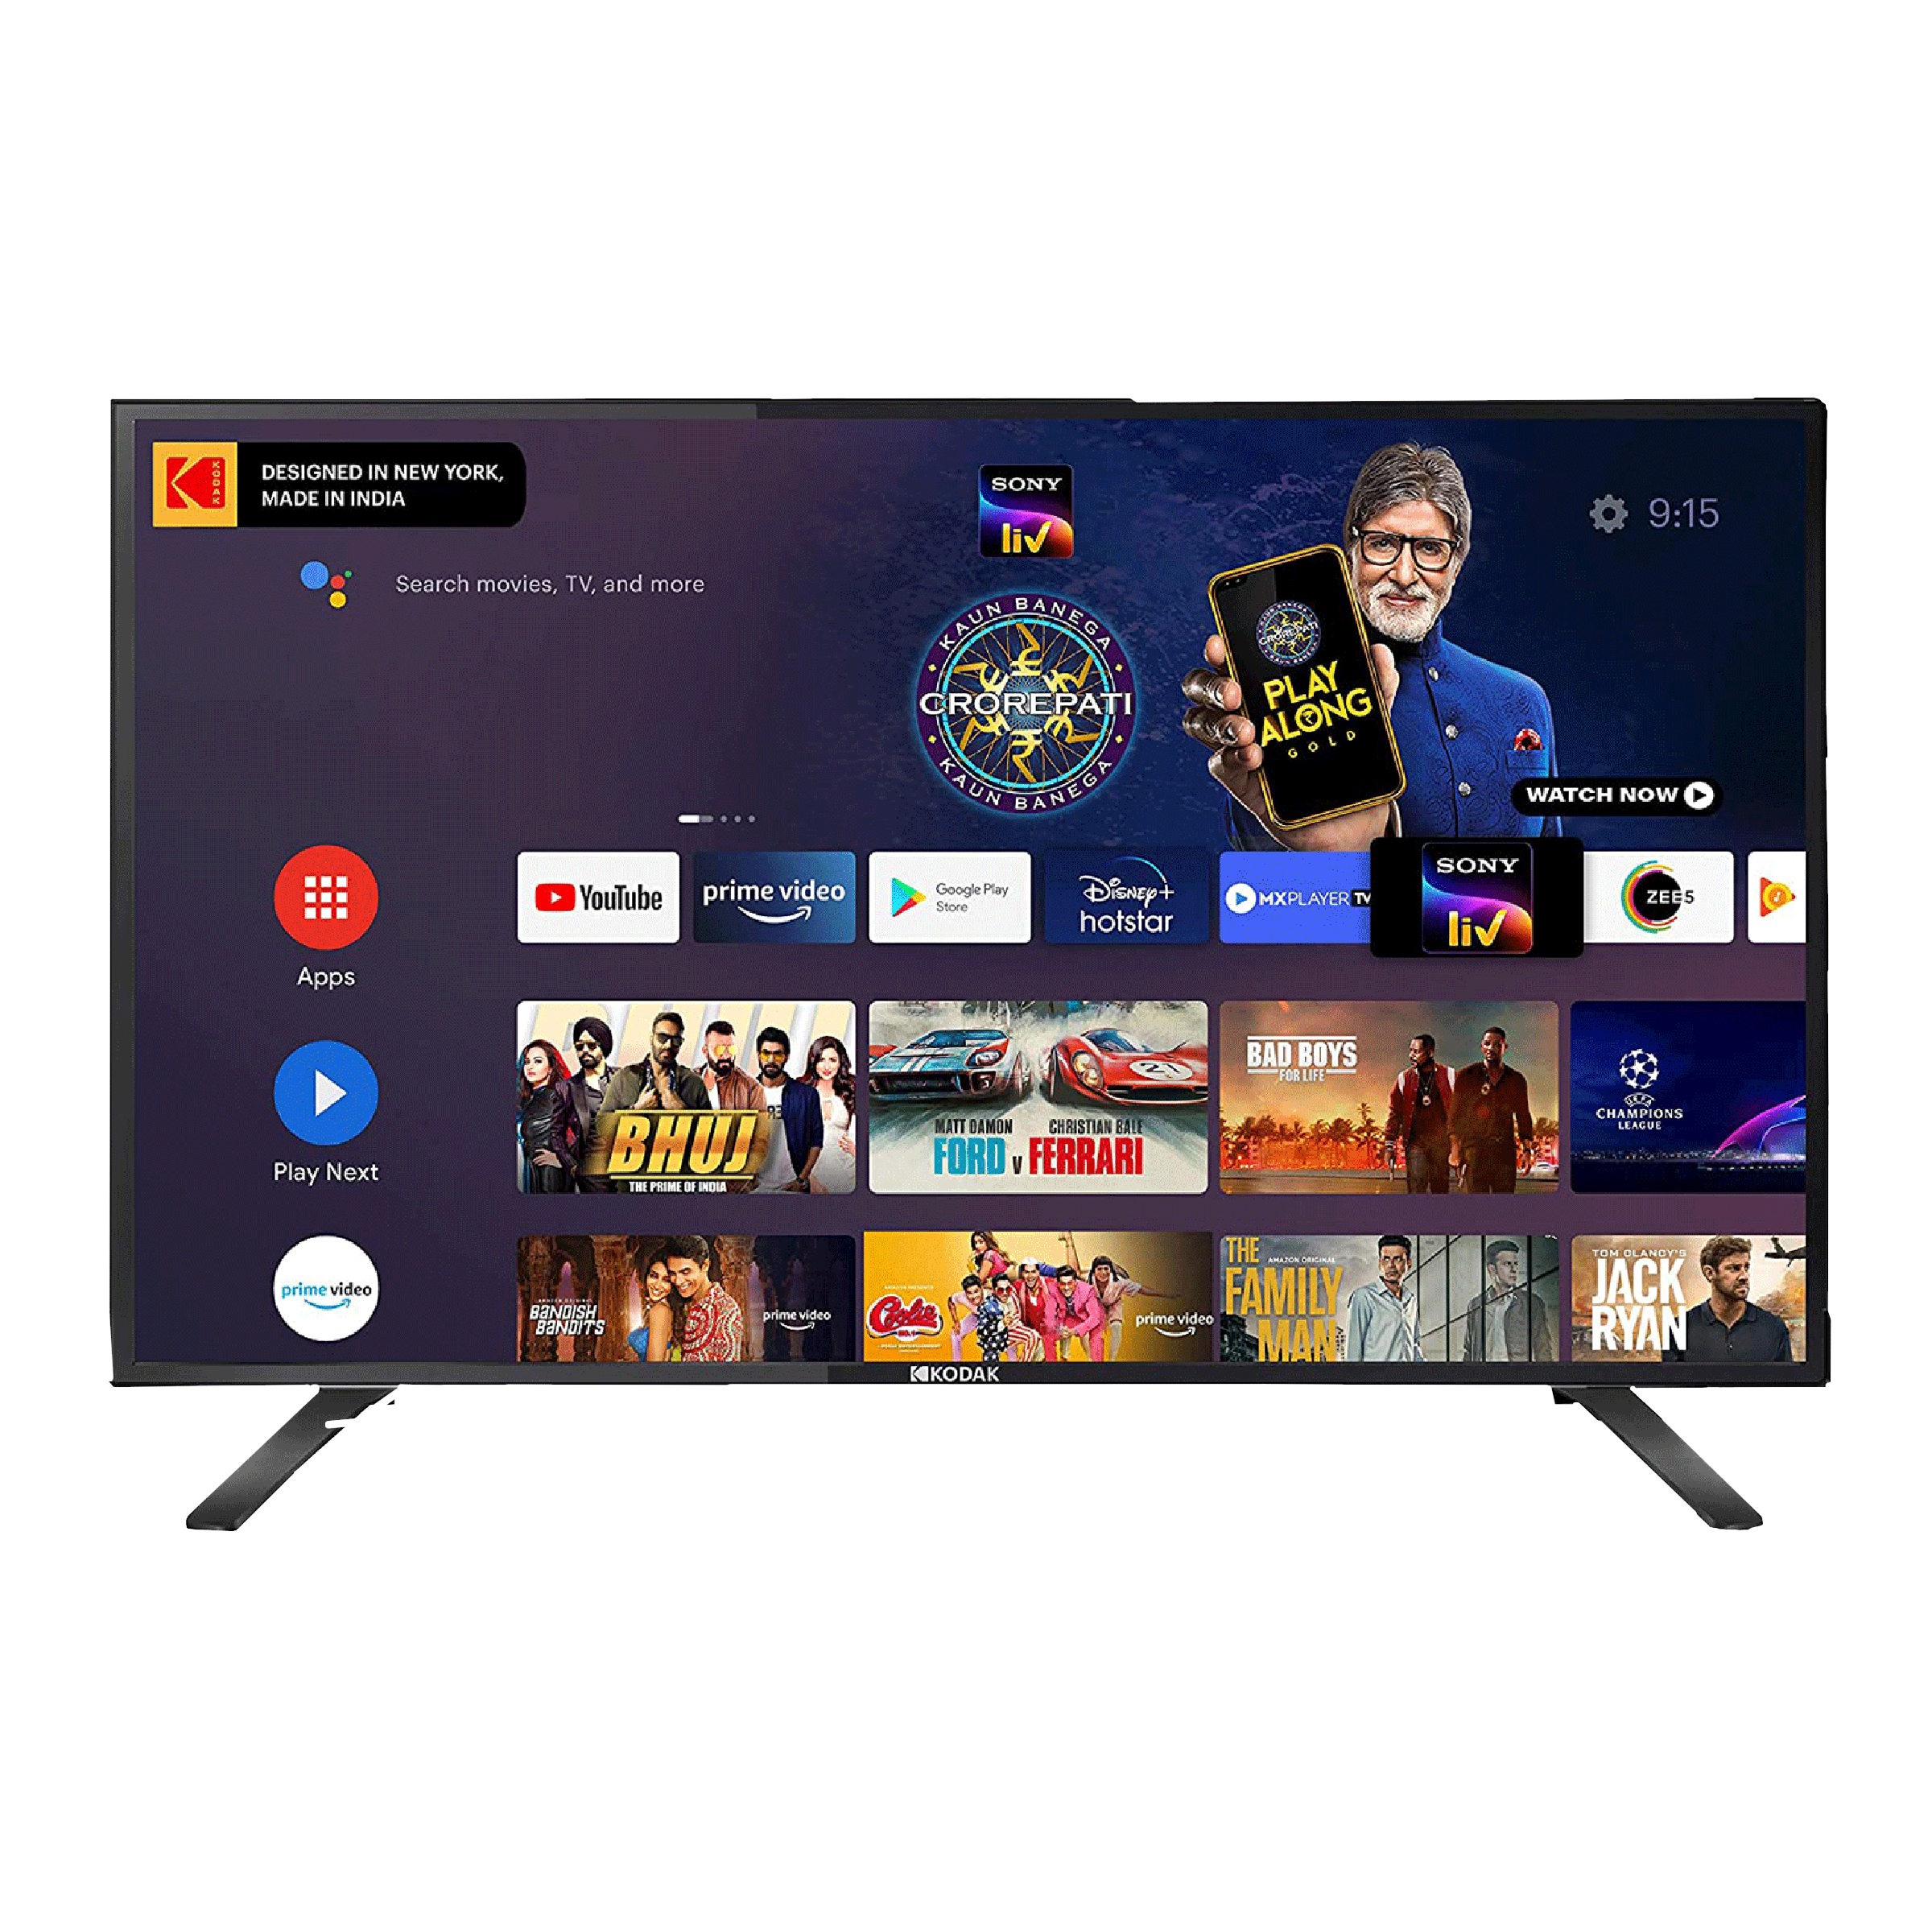 Kodak 7X Pro 102 cm (40 inch) Full HD LED Smart Android TV with Google Assistant (2020 model)_1